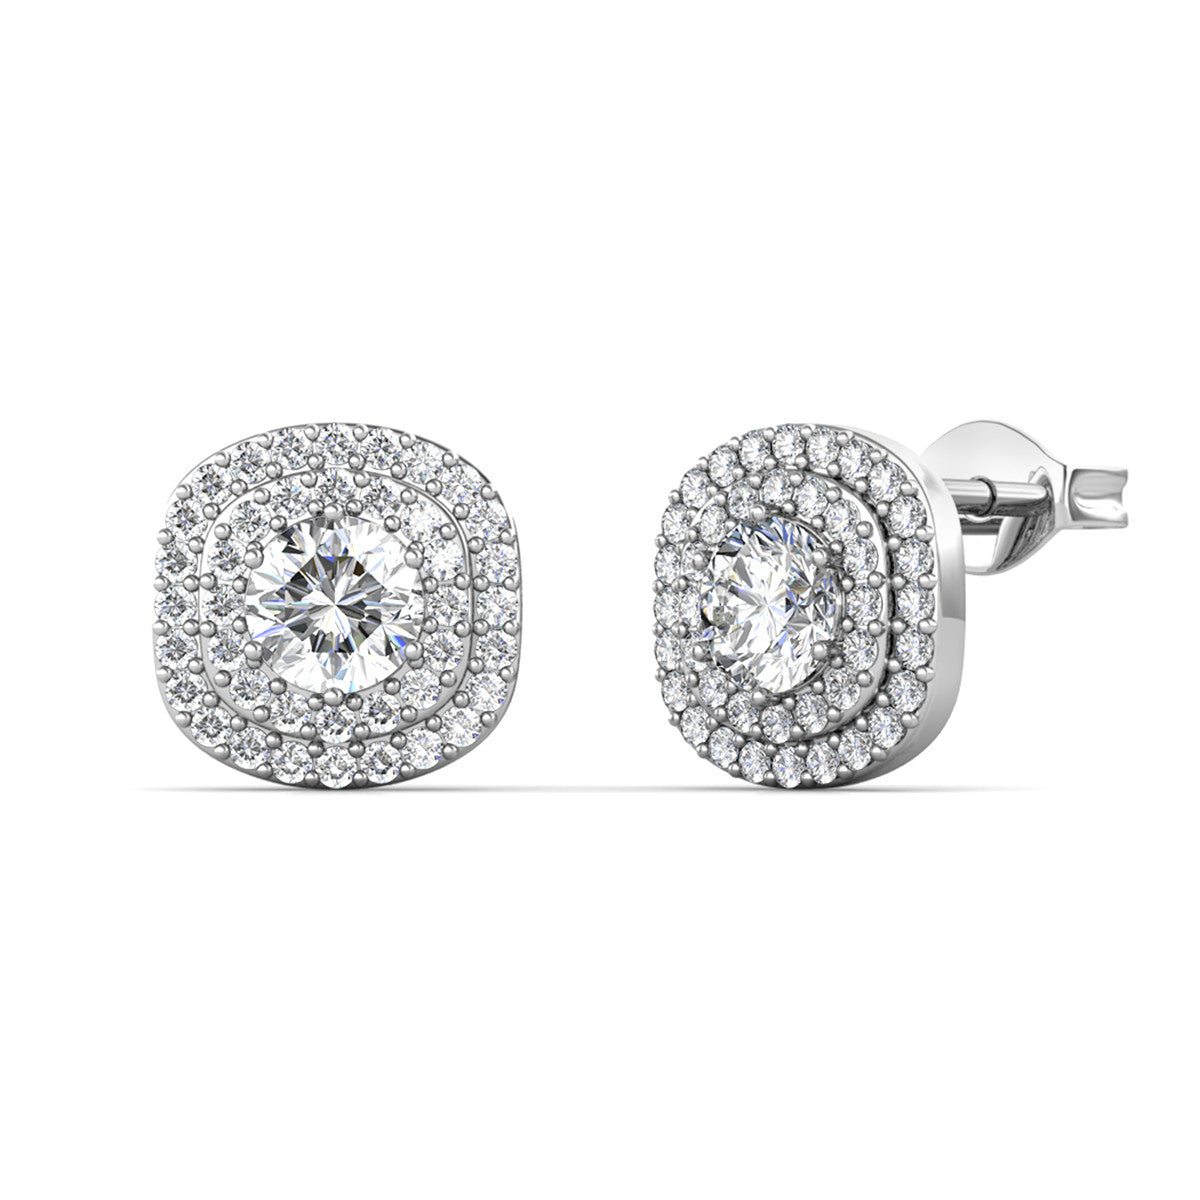 Moissanite by Cate & Chloe Lucy Sterling Silver Stud Earrings with Moissanite and 5A Cubic Zirconia Crystals